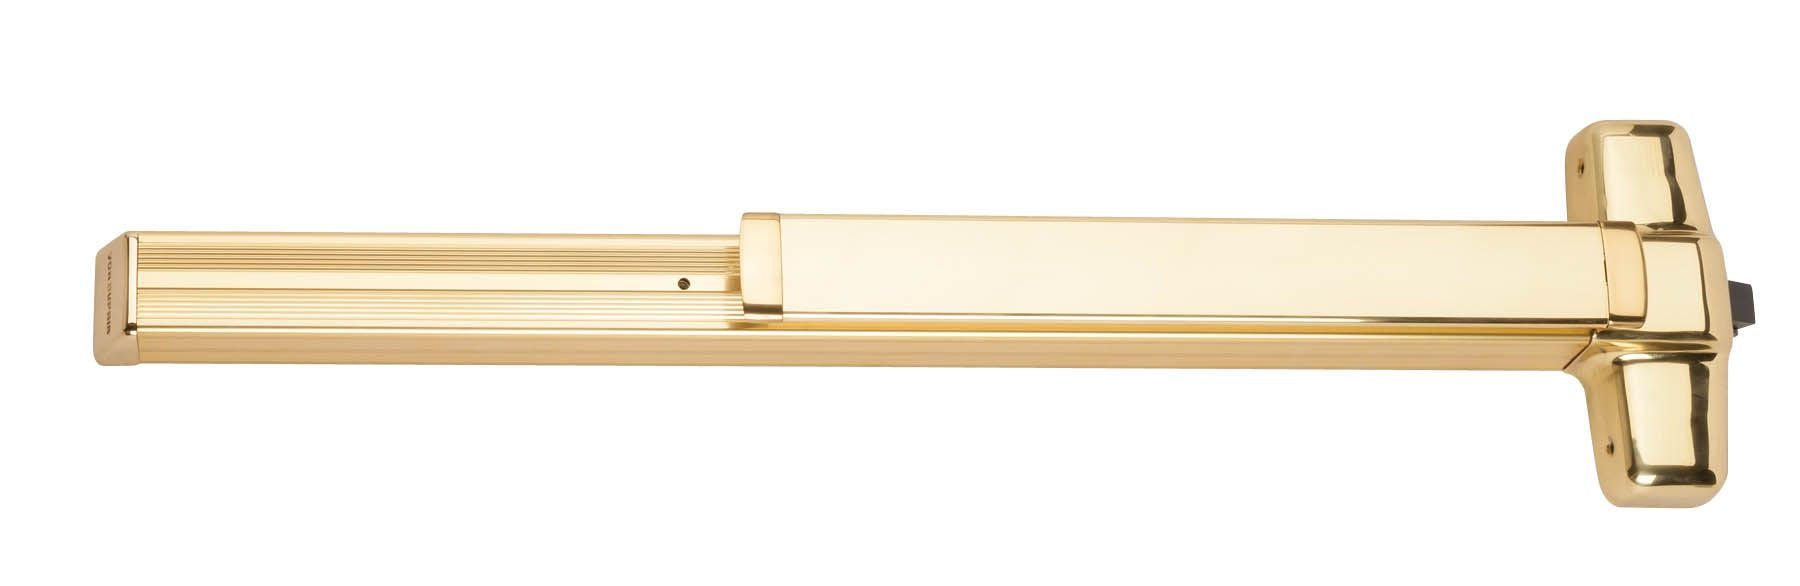 Rim Grooved Case Exit Device; 605 Bright Brass Finish